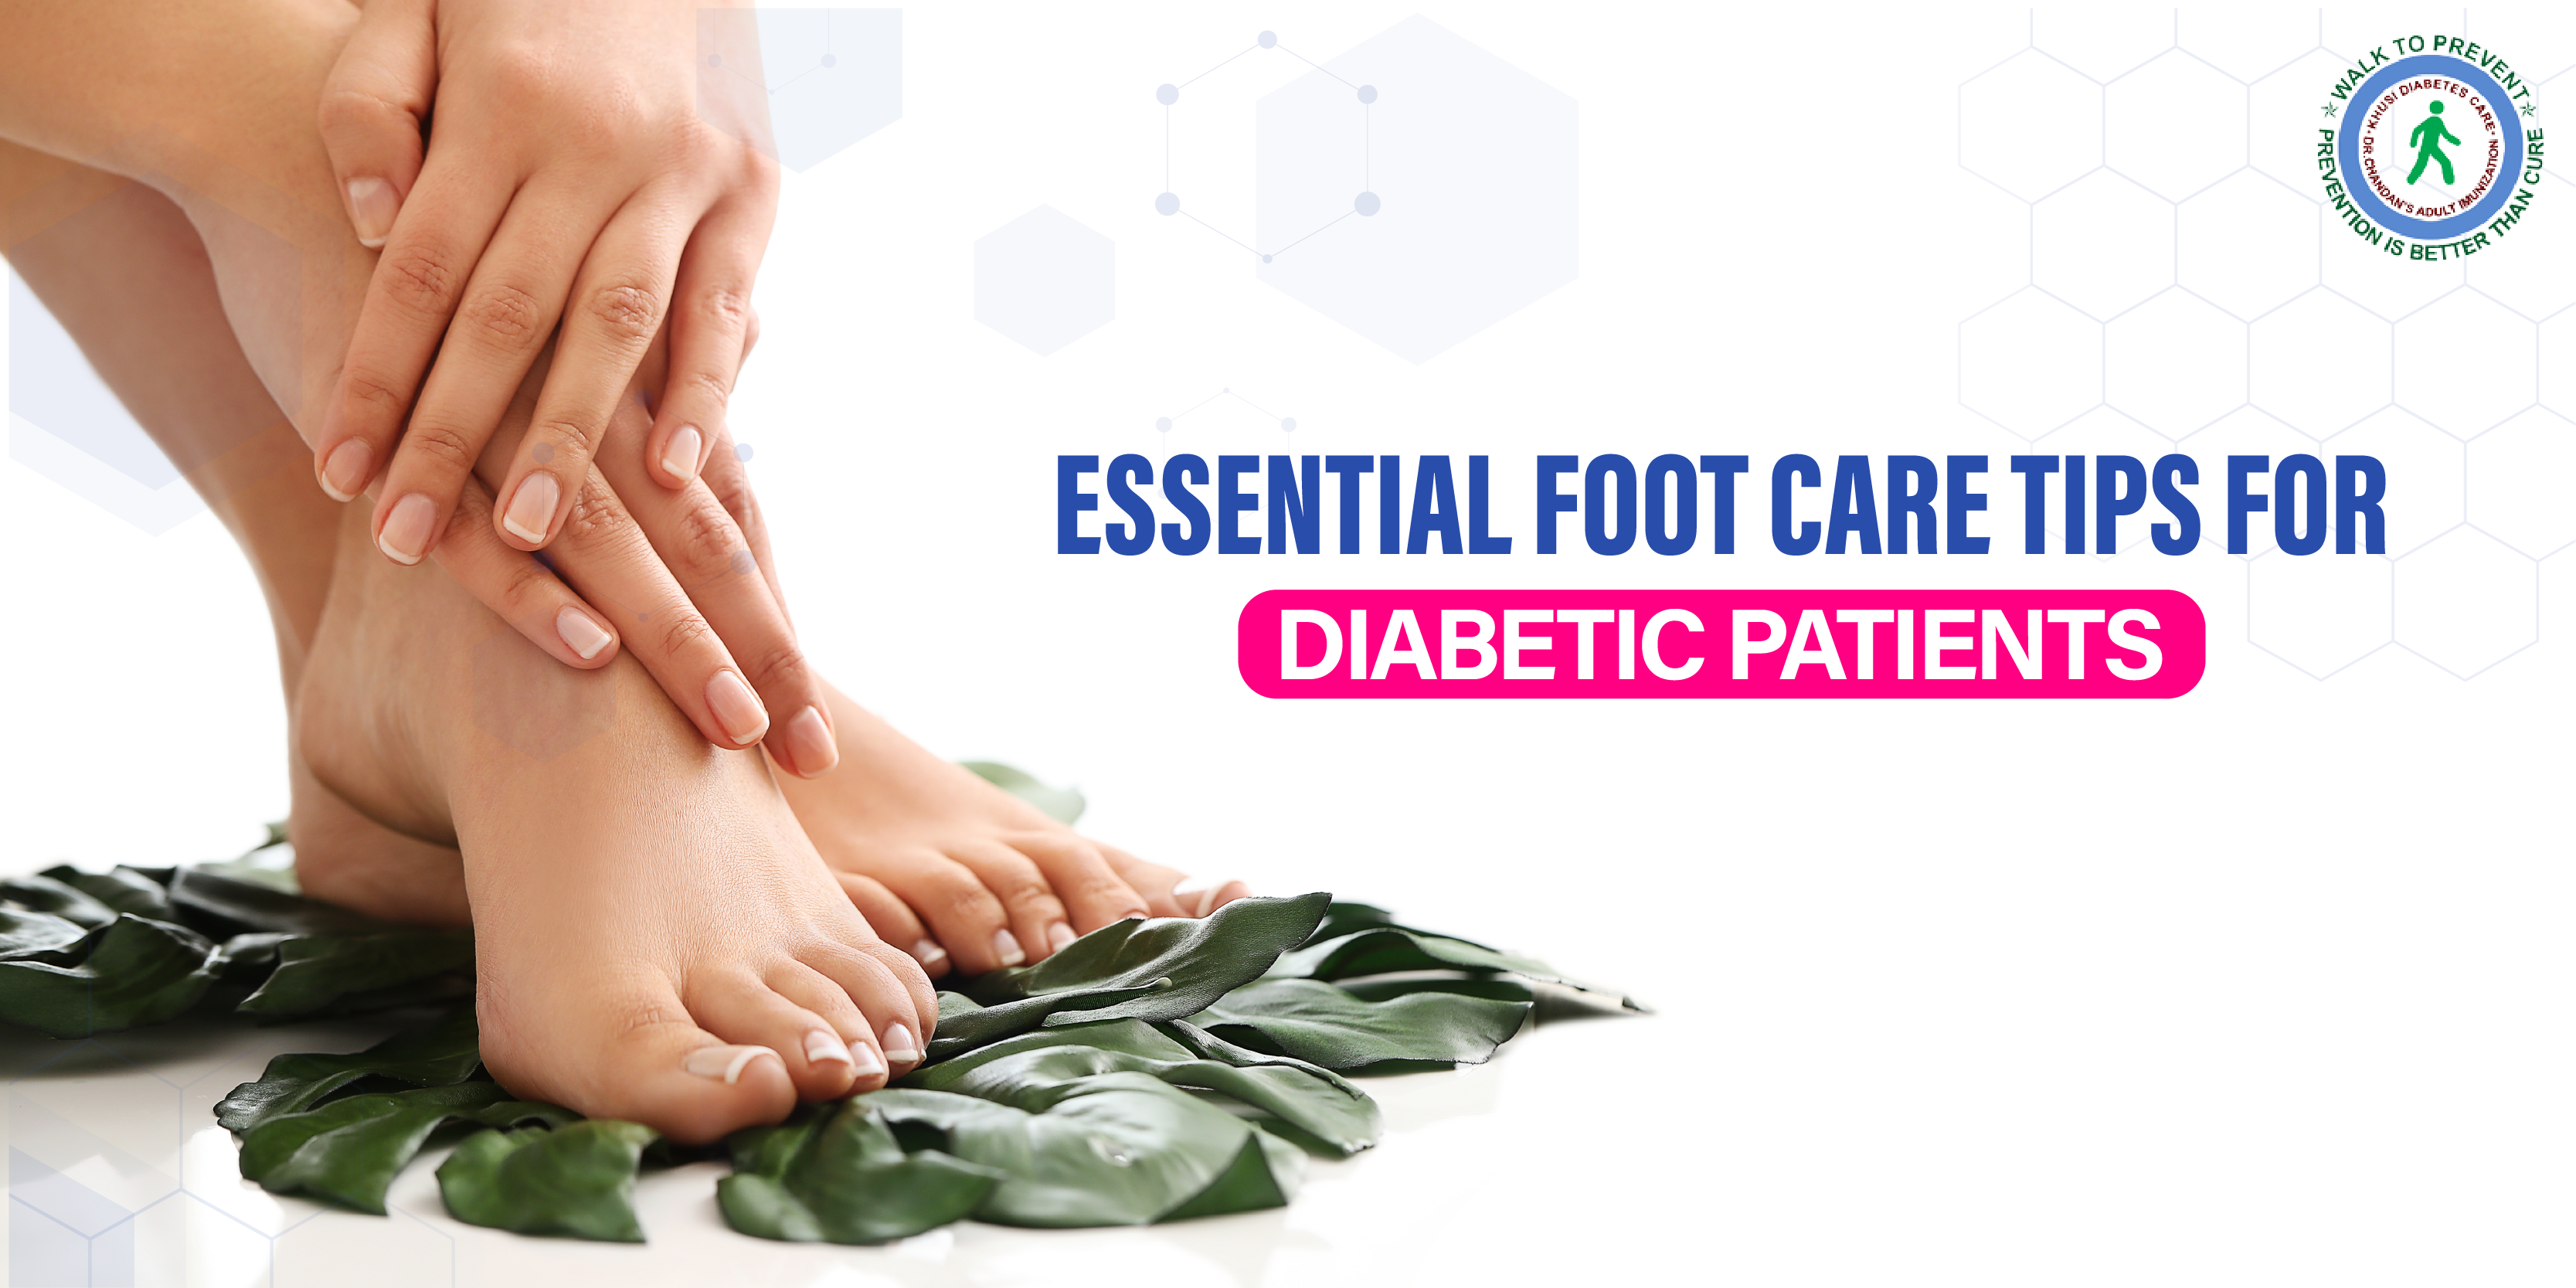 Why Is Foot Care Important For People With Diabetes?